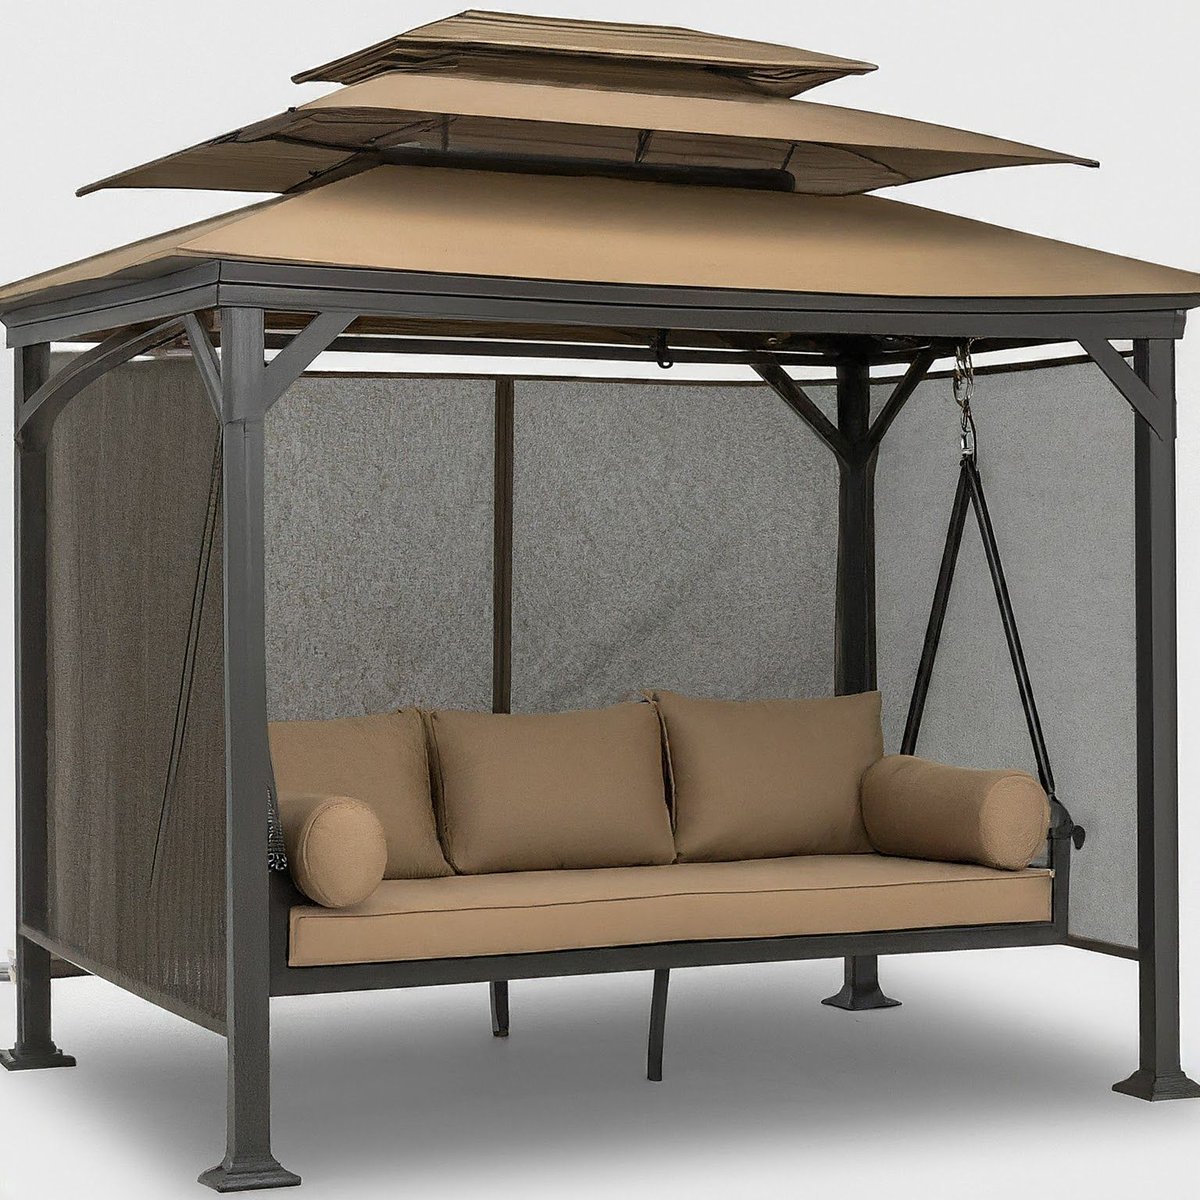 Check out the latest Gazebo Swing Bench at sunlitbackyardoasis.com! Perfect for relaxing outdoors. #BackyardBliss #OutdoorLiving.